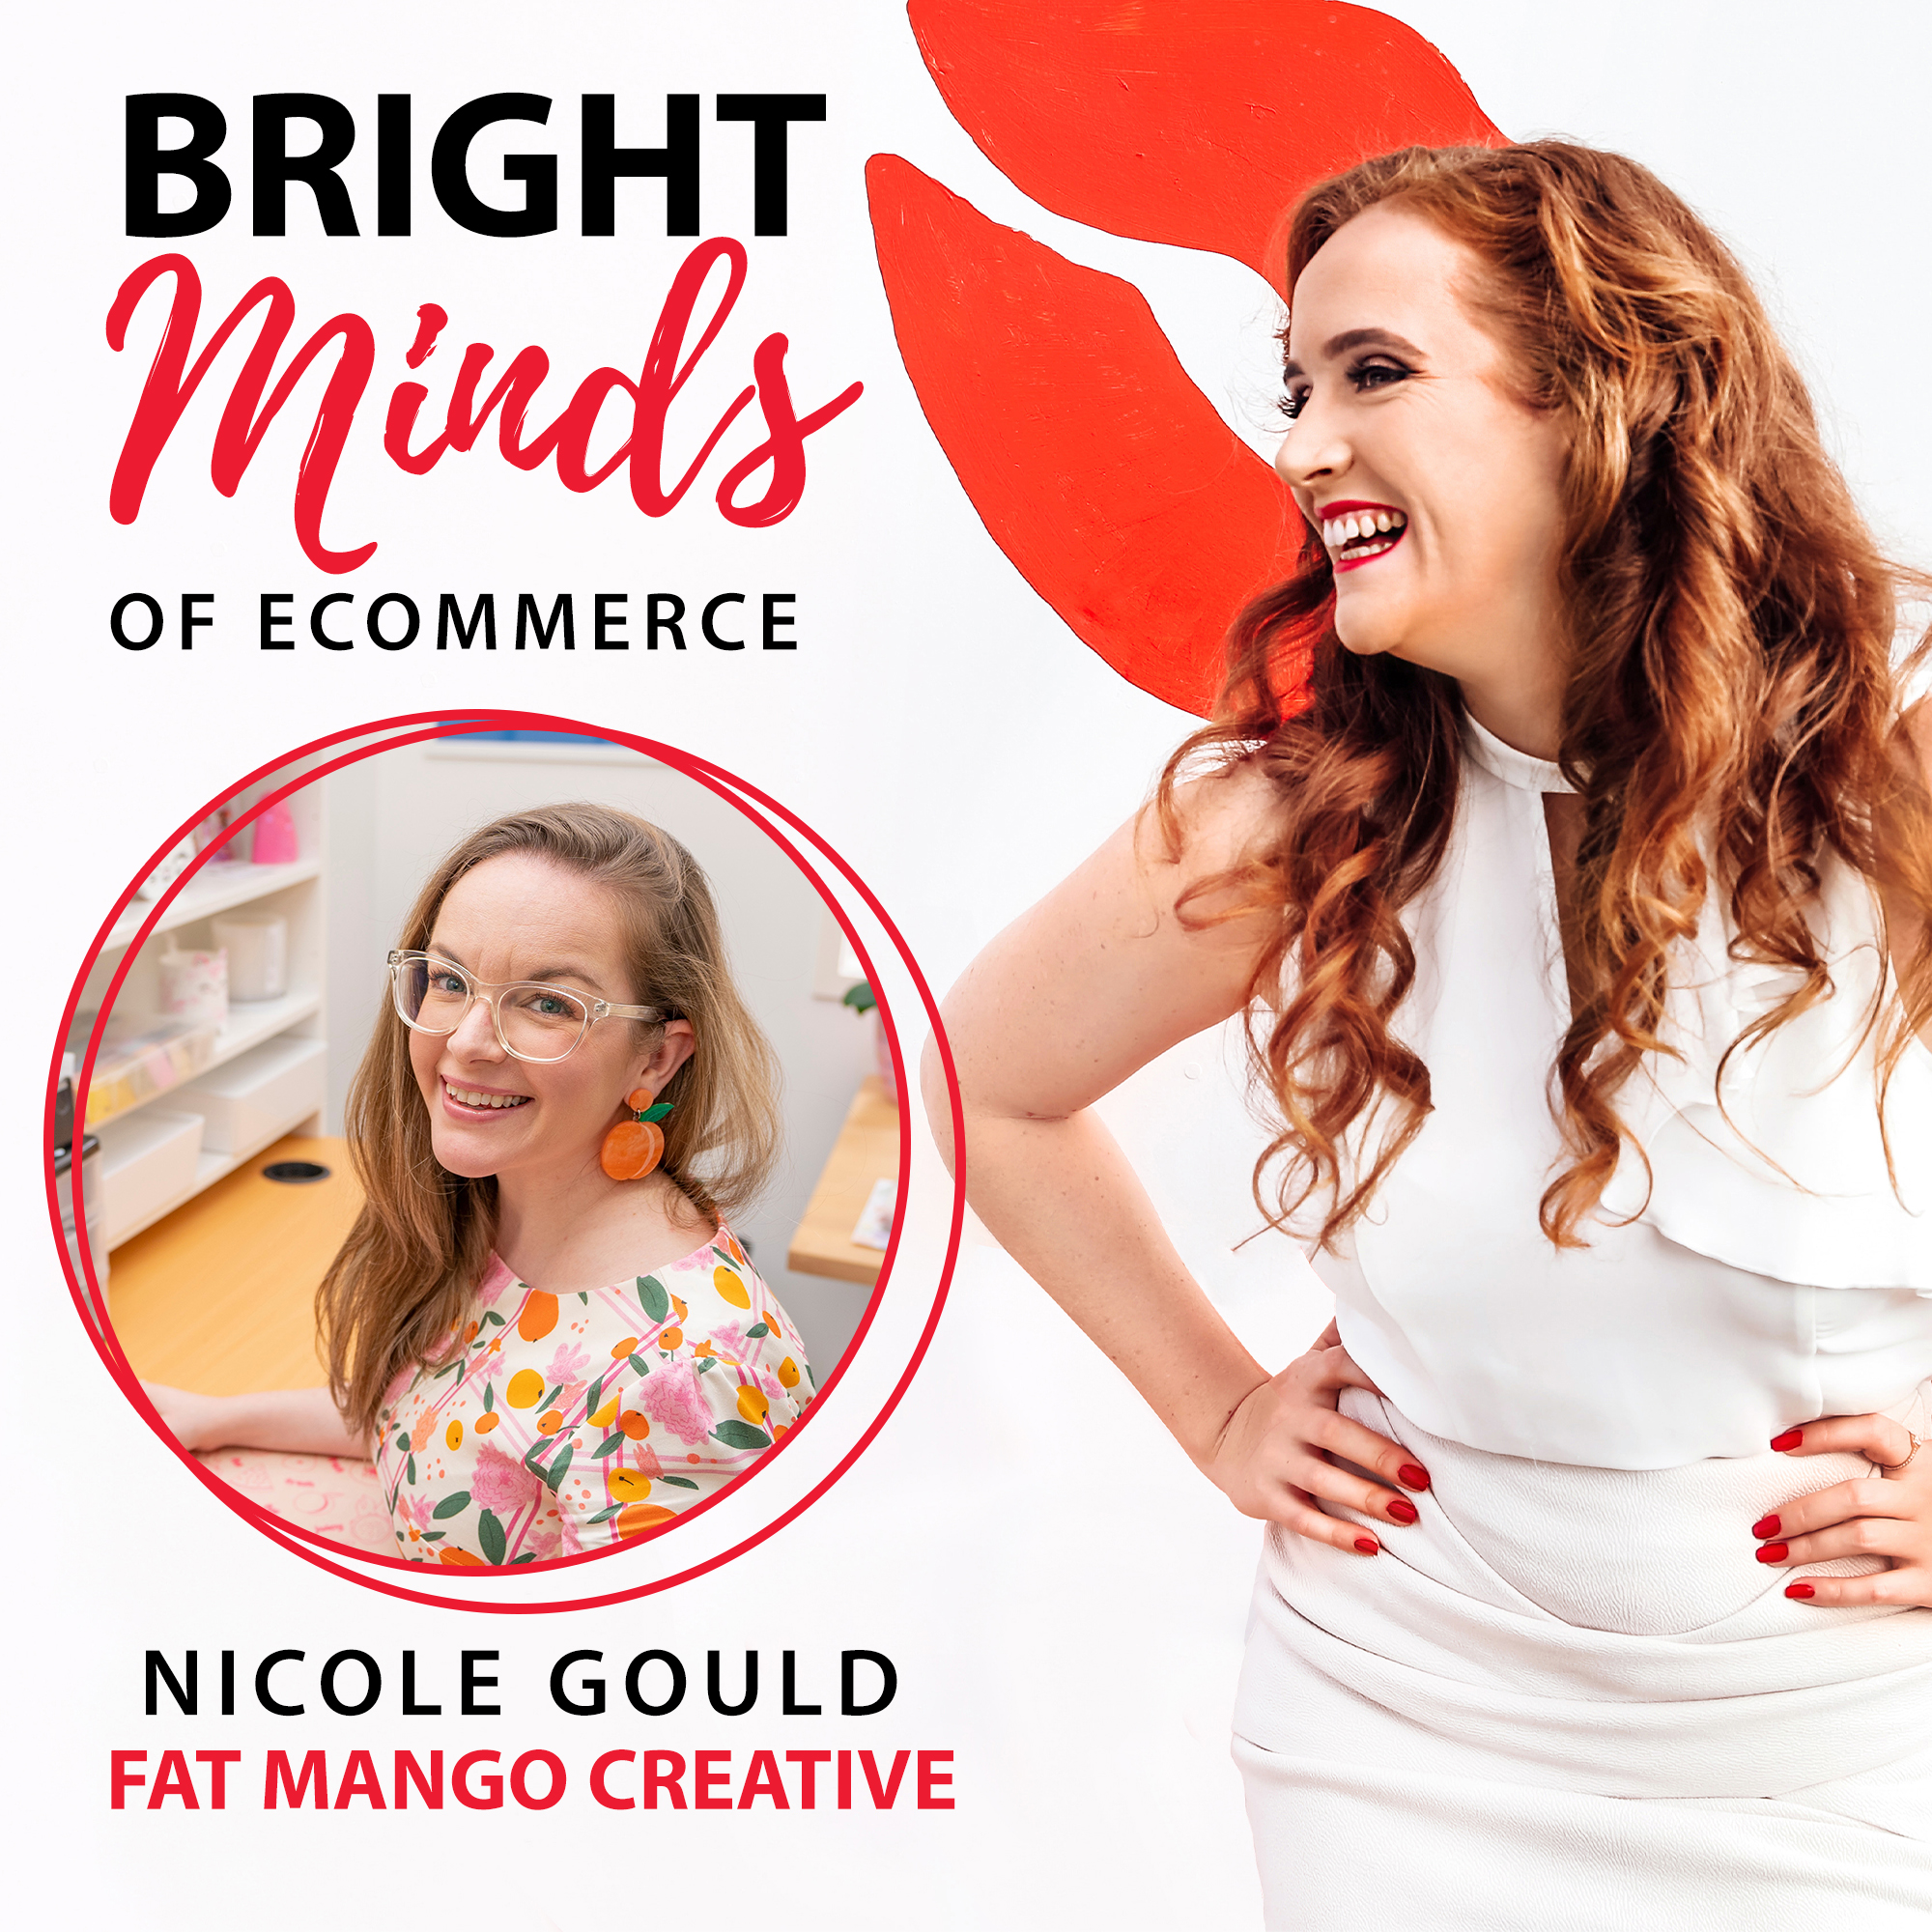 Scaling your business organically with creative powerhouse Nicole Gould from Fat Mango Creative